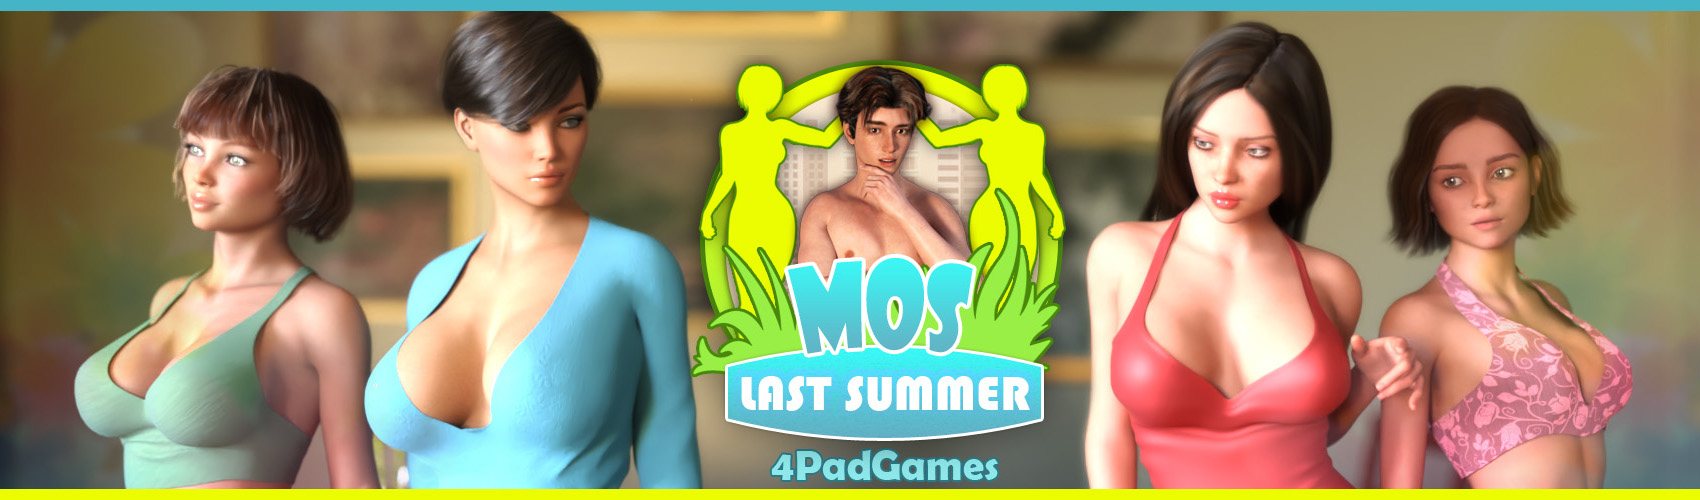 MOS Last Summer HD [4PadGames] Adult xxx Game Download